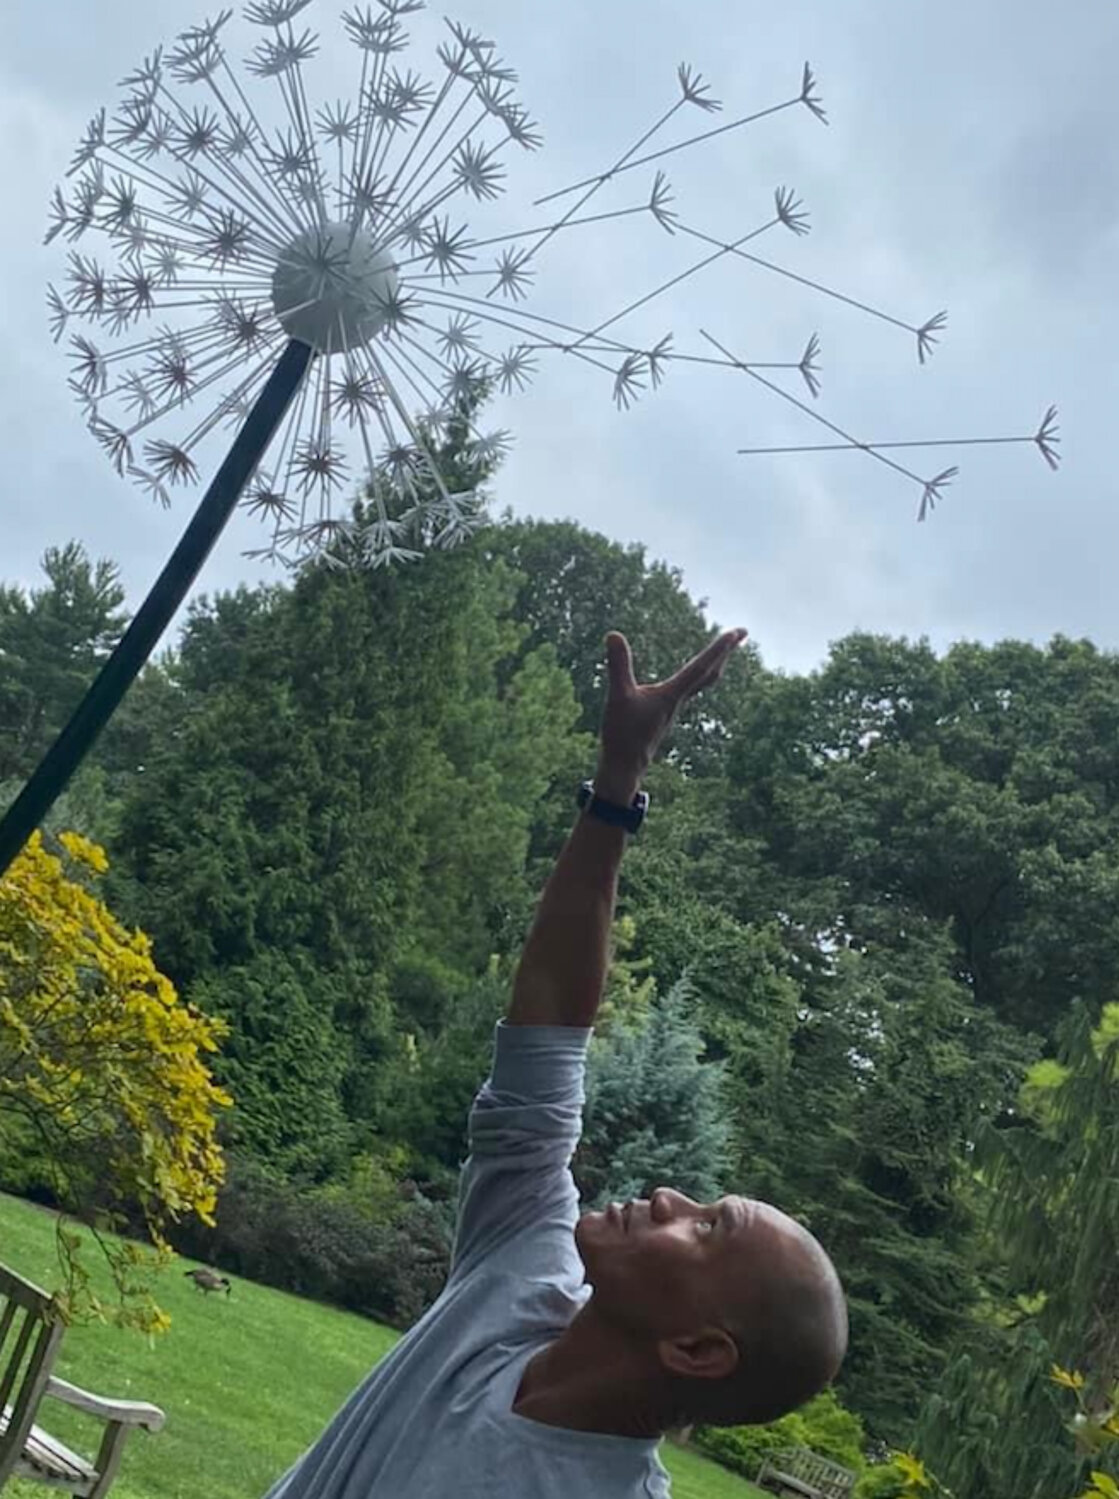 A lover of nature, Mitchell Siegel’s dandelion sculpture features petals falling off to give it the effect of them flying in the wind.